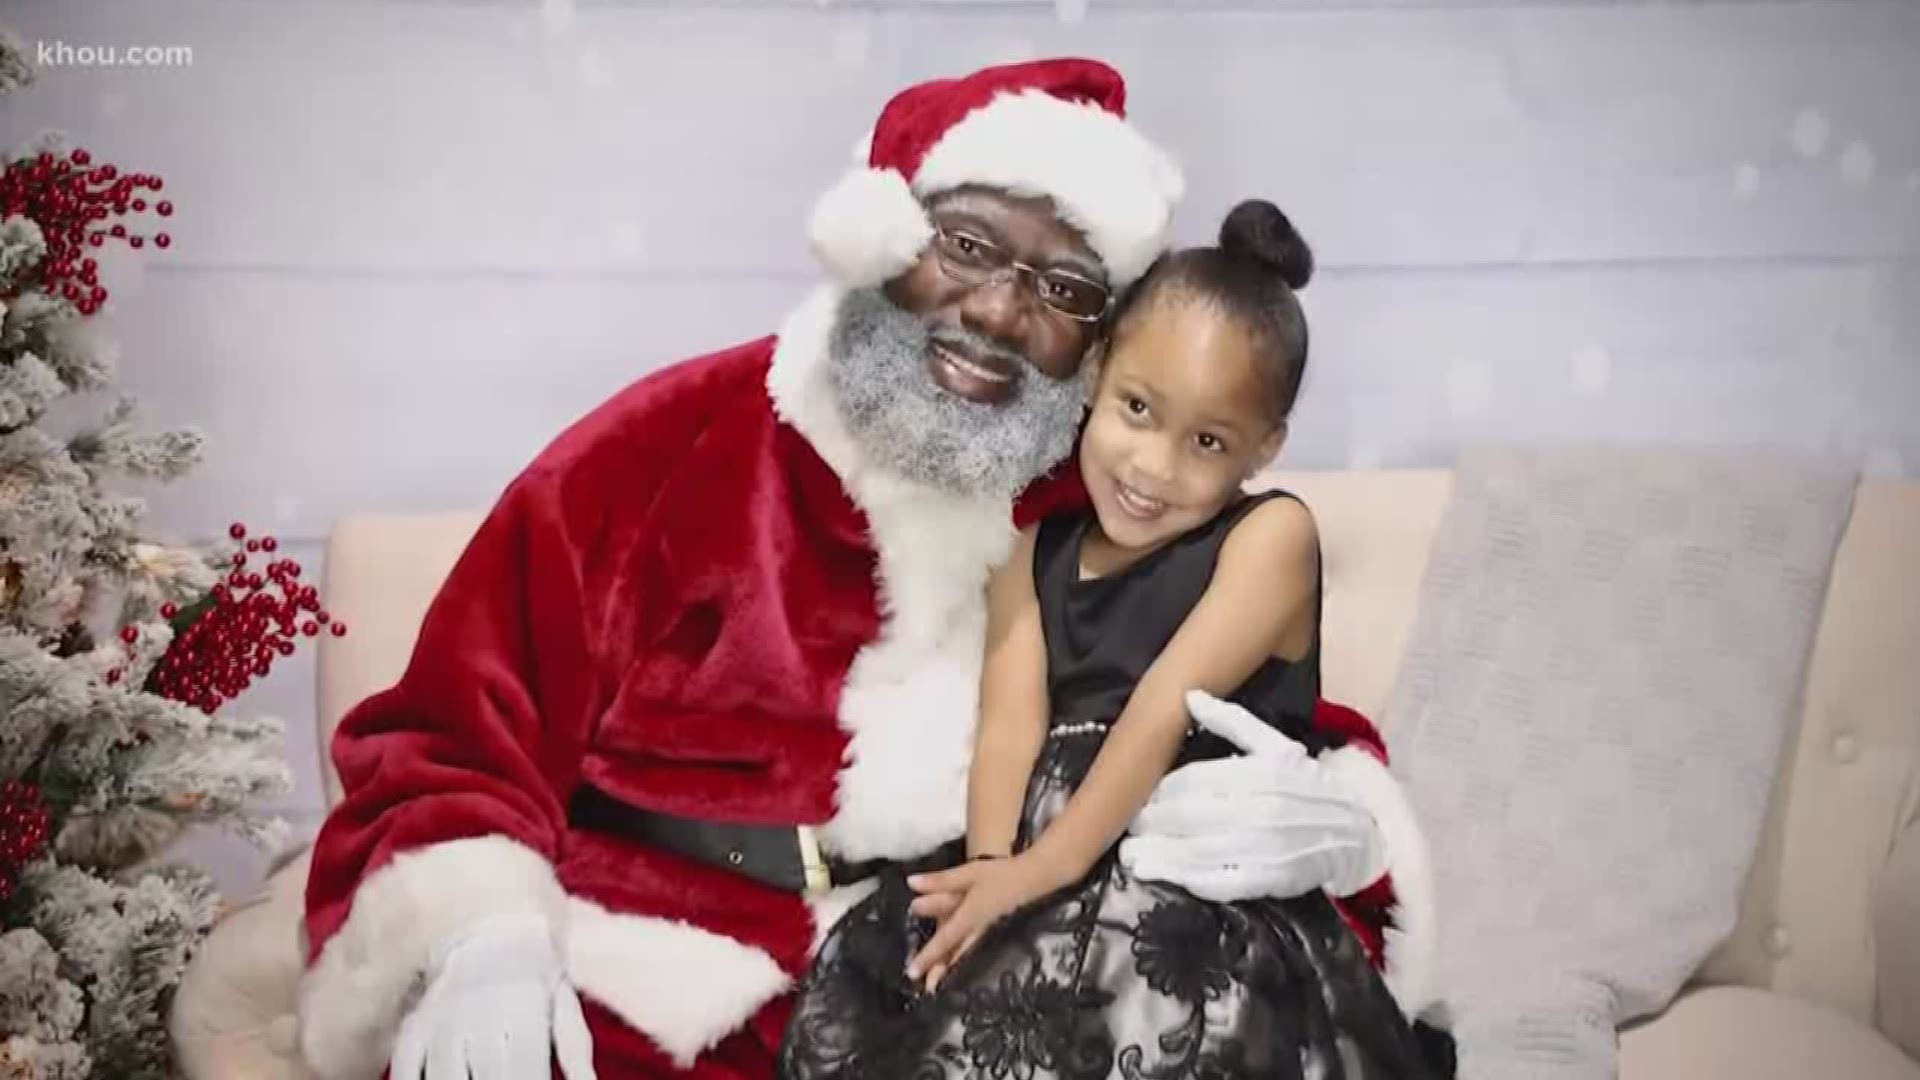 There is a Santa Claus in Houston whose photo sessions are selling out because so many parents what their kids to meet the St. Nick who looks like them.